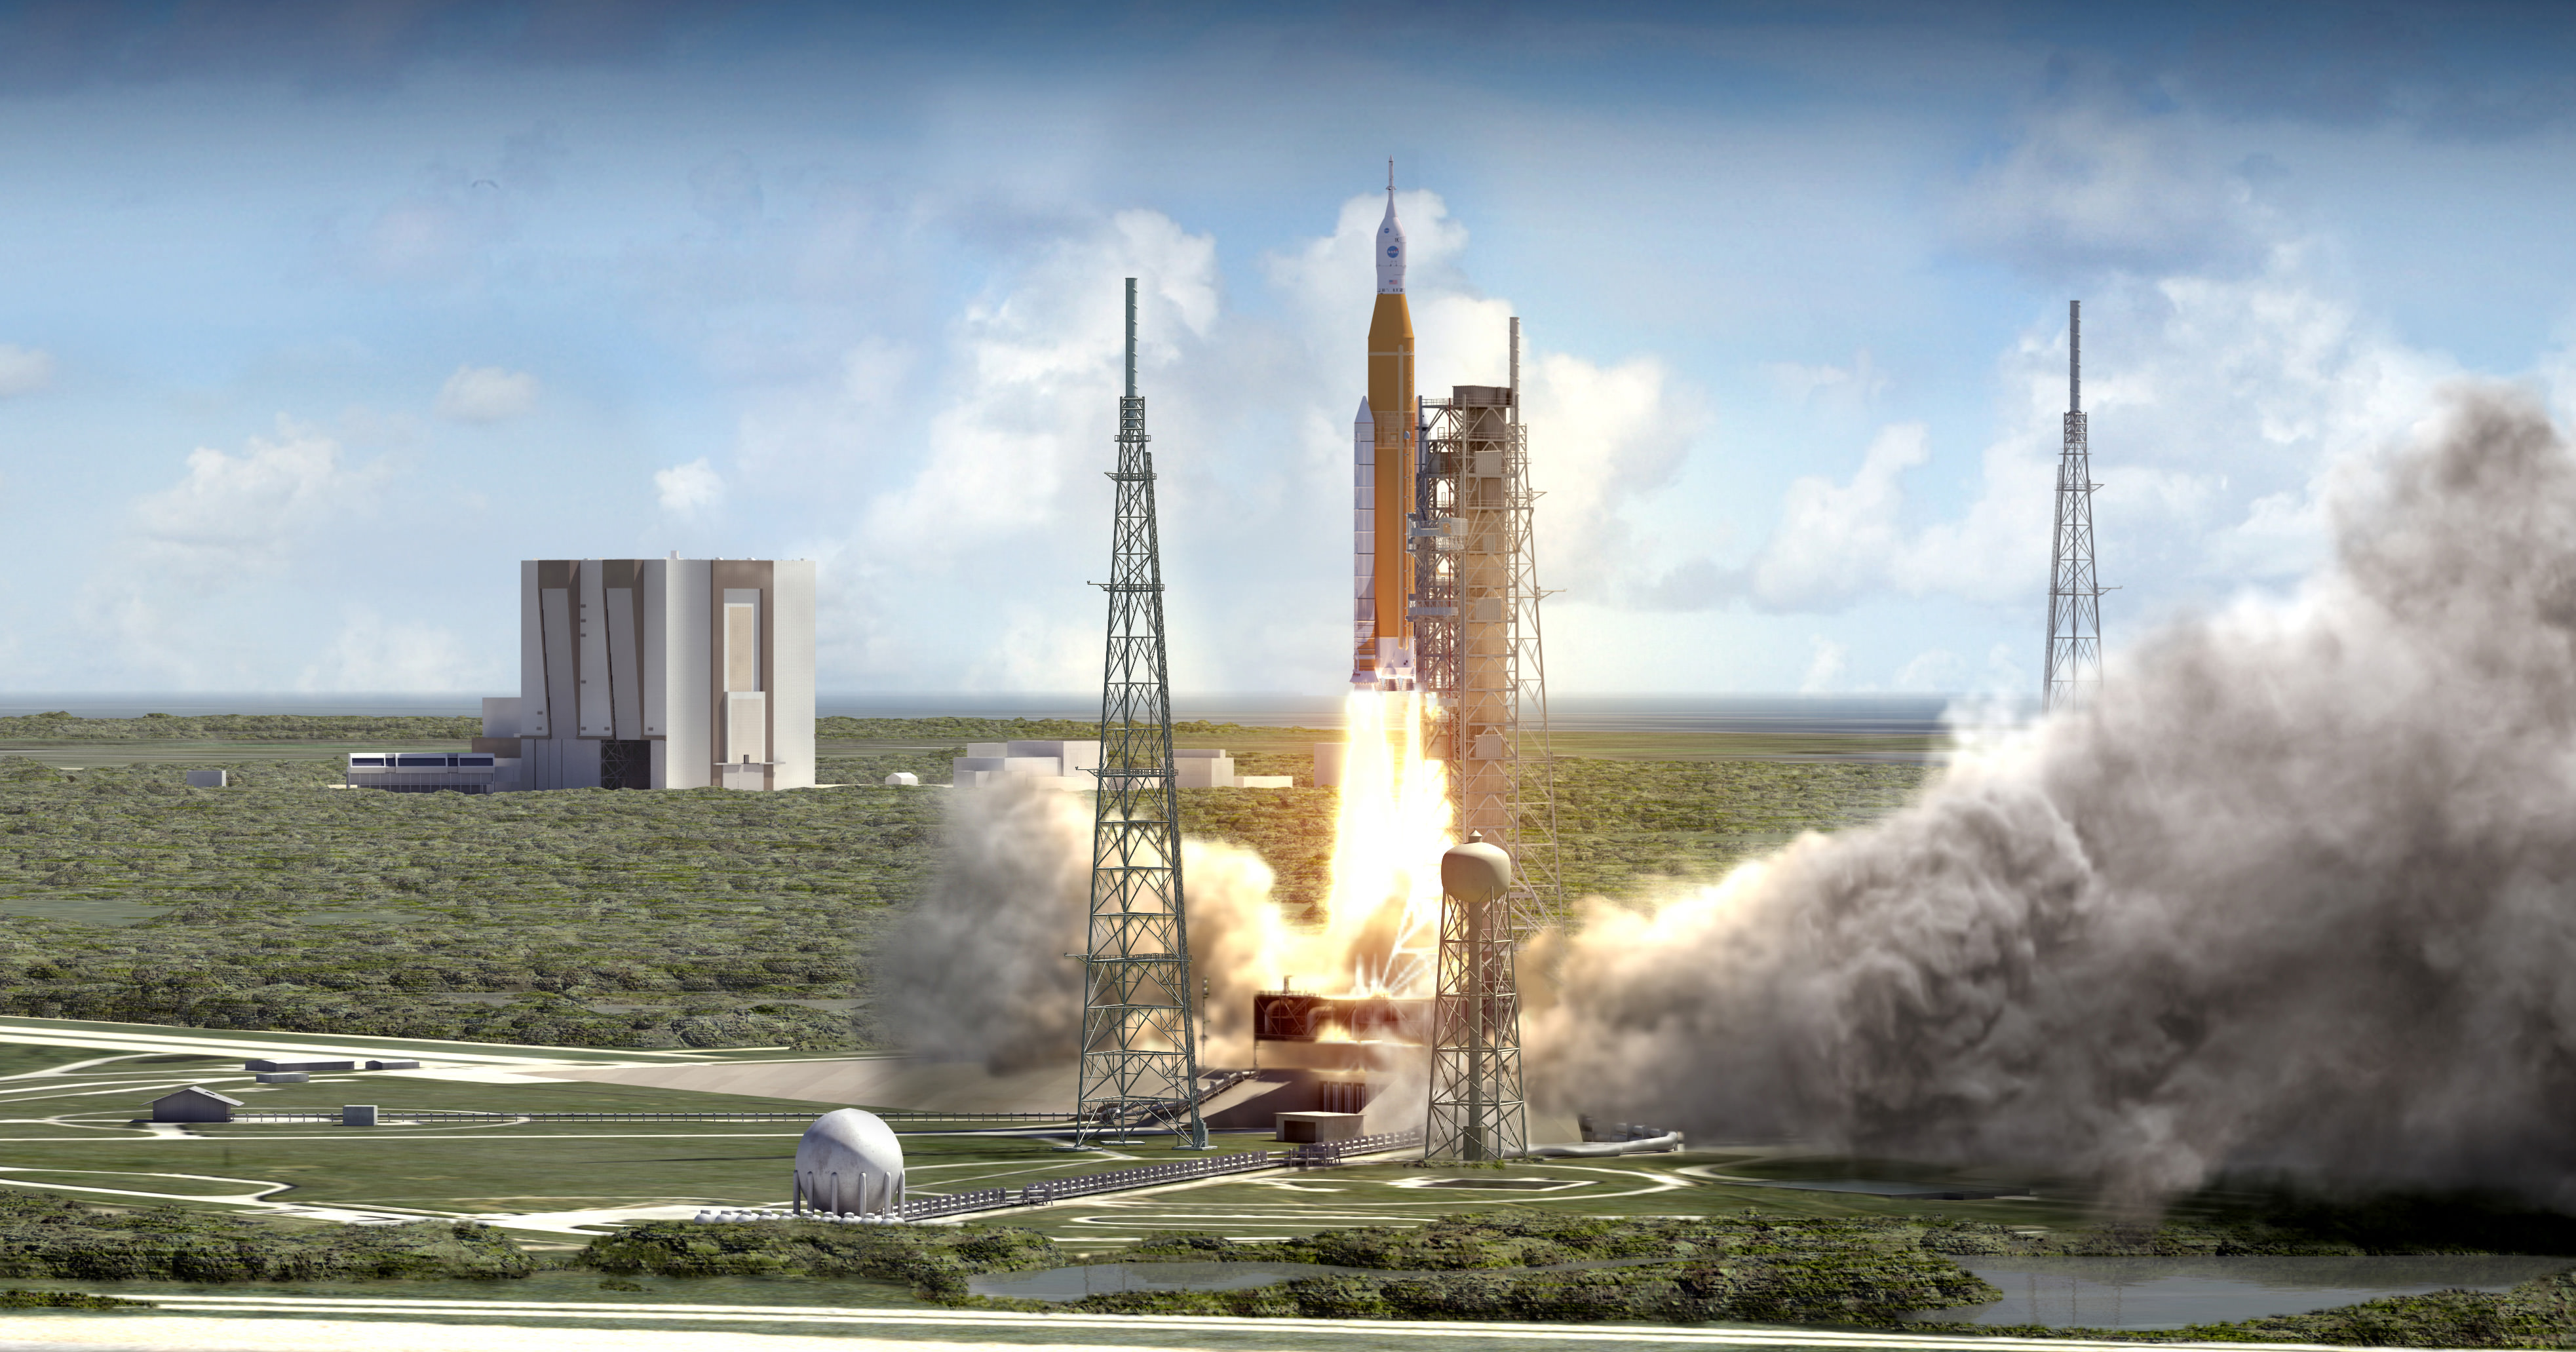 NASA's Space Launch System (SLS) blasts off from launch pad 39B at the Kennedy Space Center in this artist rendering showing a view of the liftoff of the Block 1 70-metric-ton (77-ton) crew vehicle configuration.   Credit: NASA/MSFC